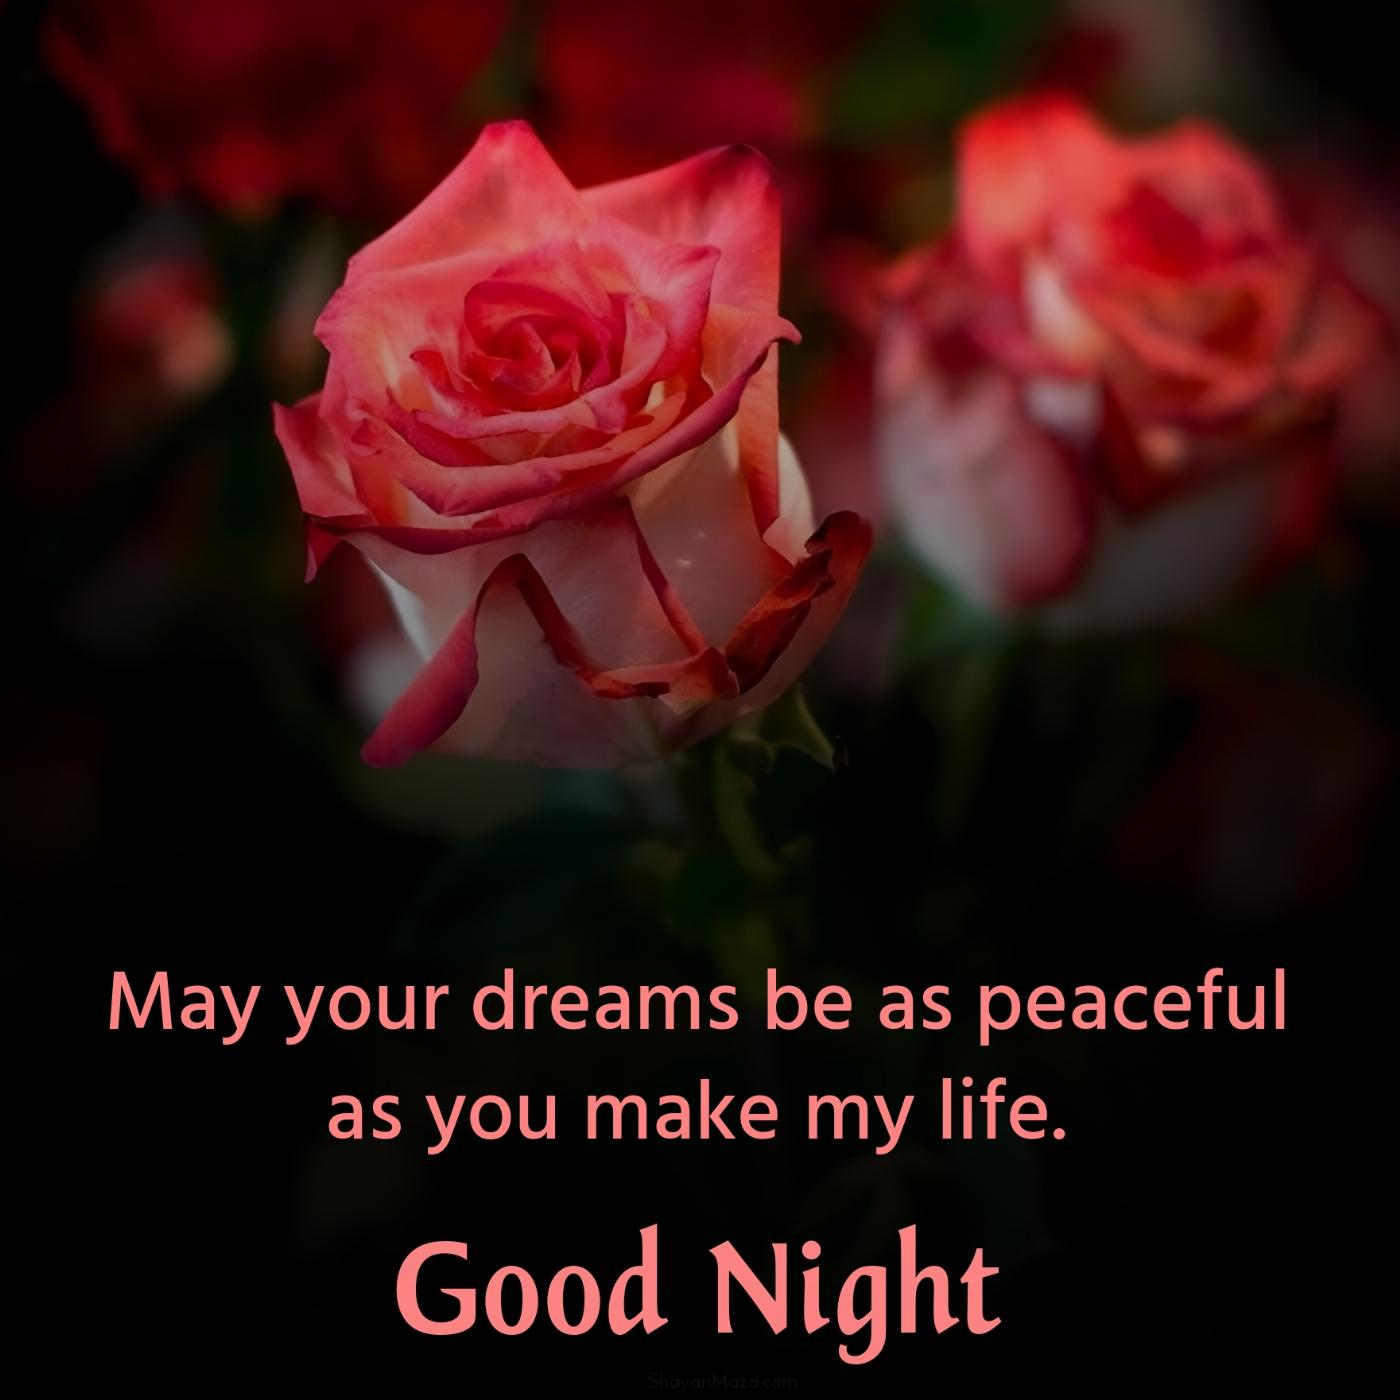 May your dreams be as peaceful as you make my life